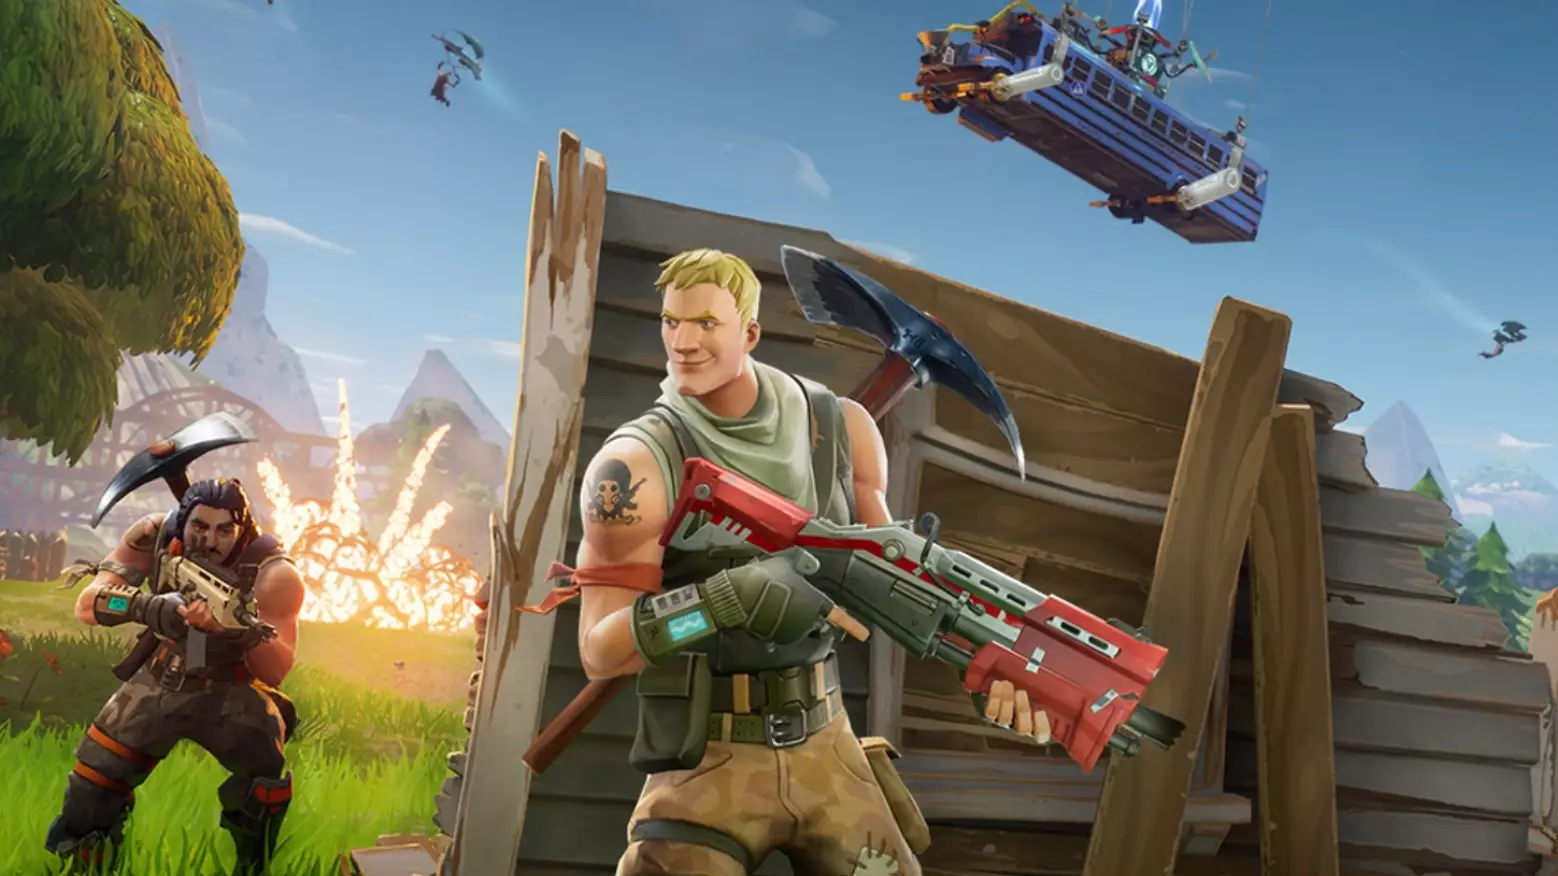 Fortnite Announce They'll Nerf Shotguns And Remove Jetpack